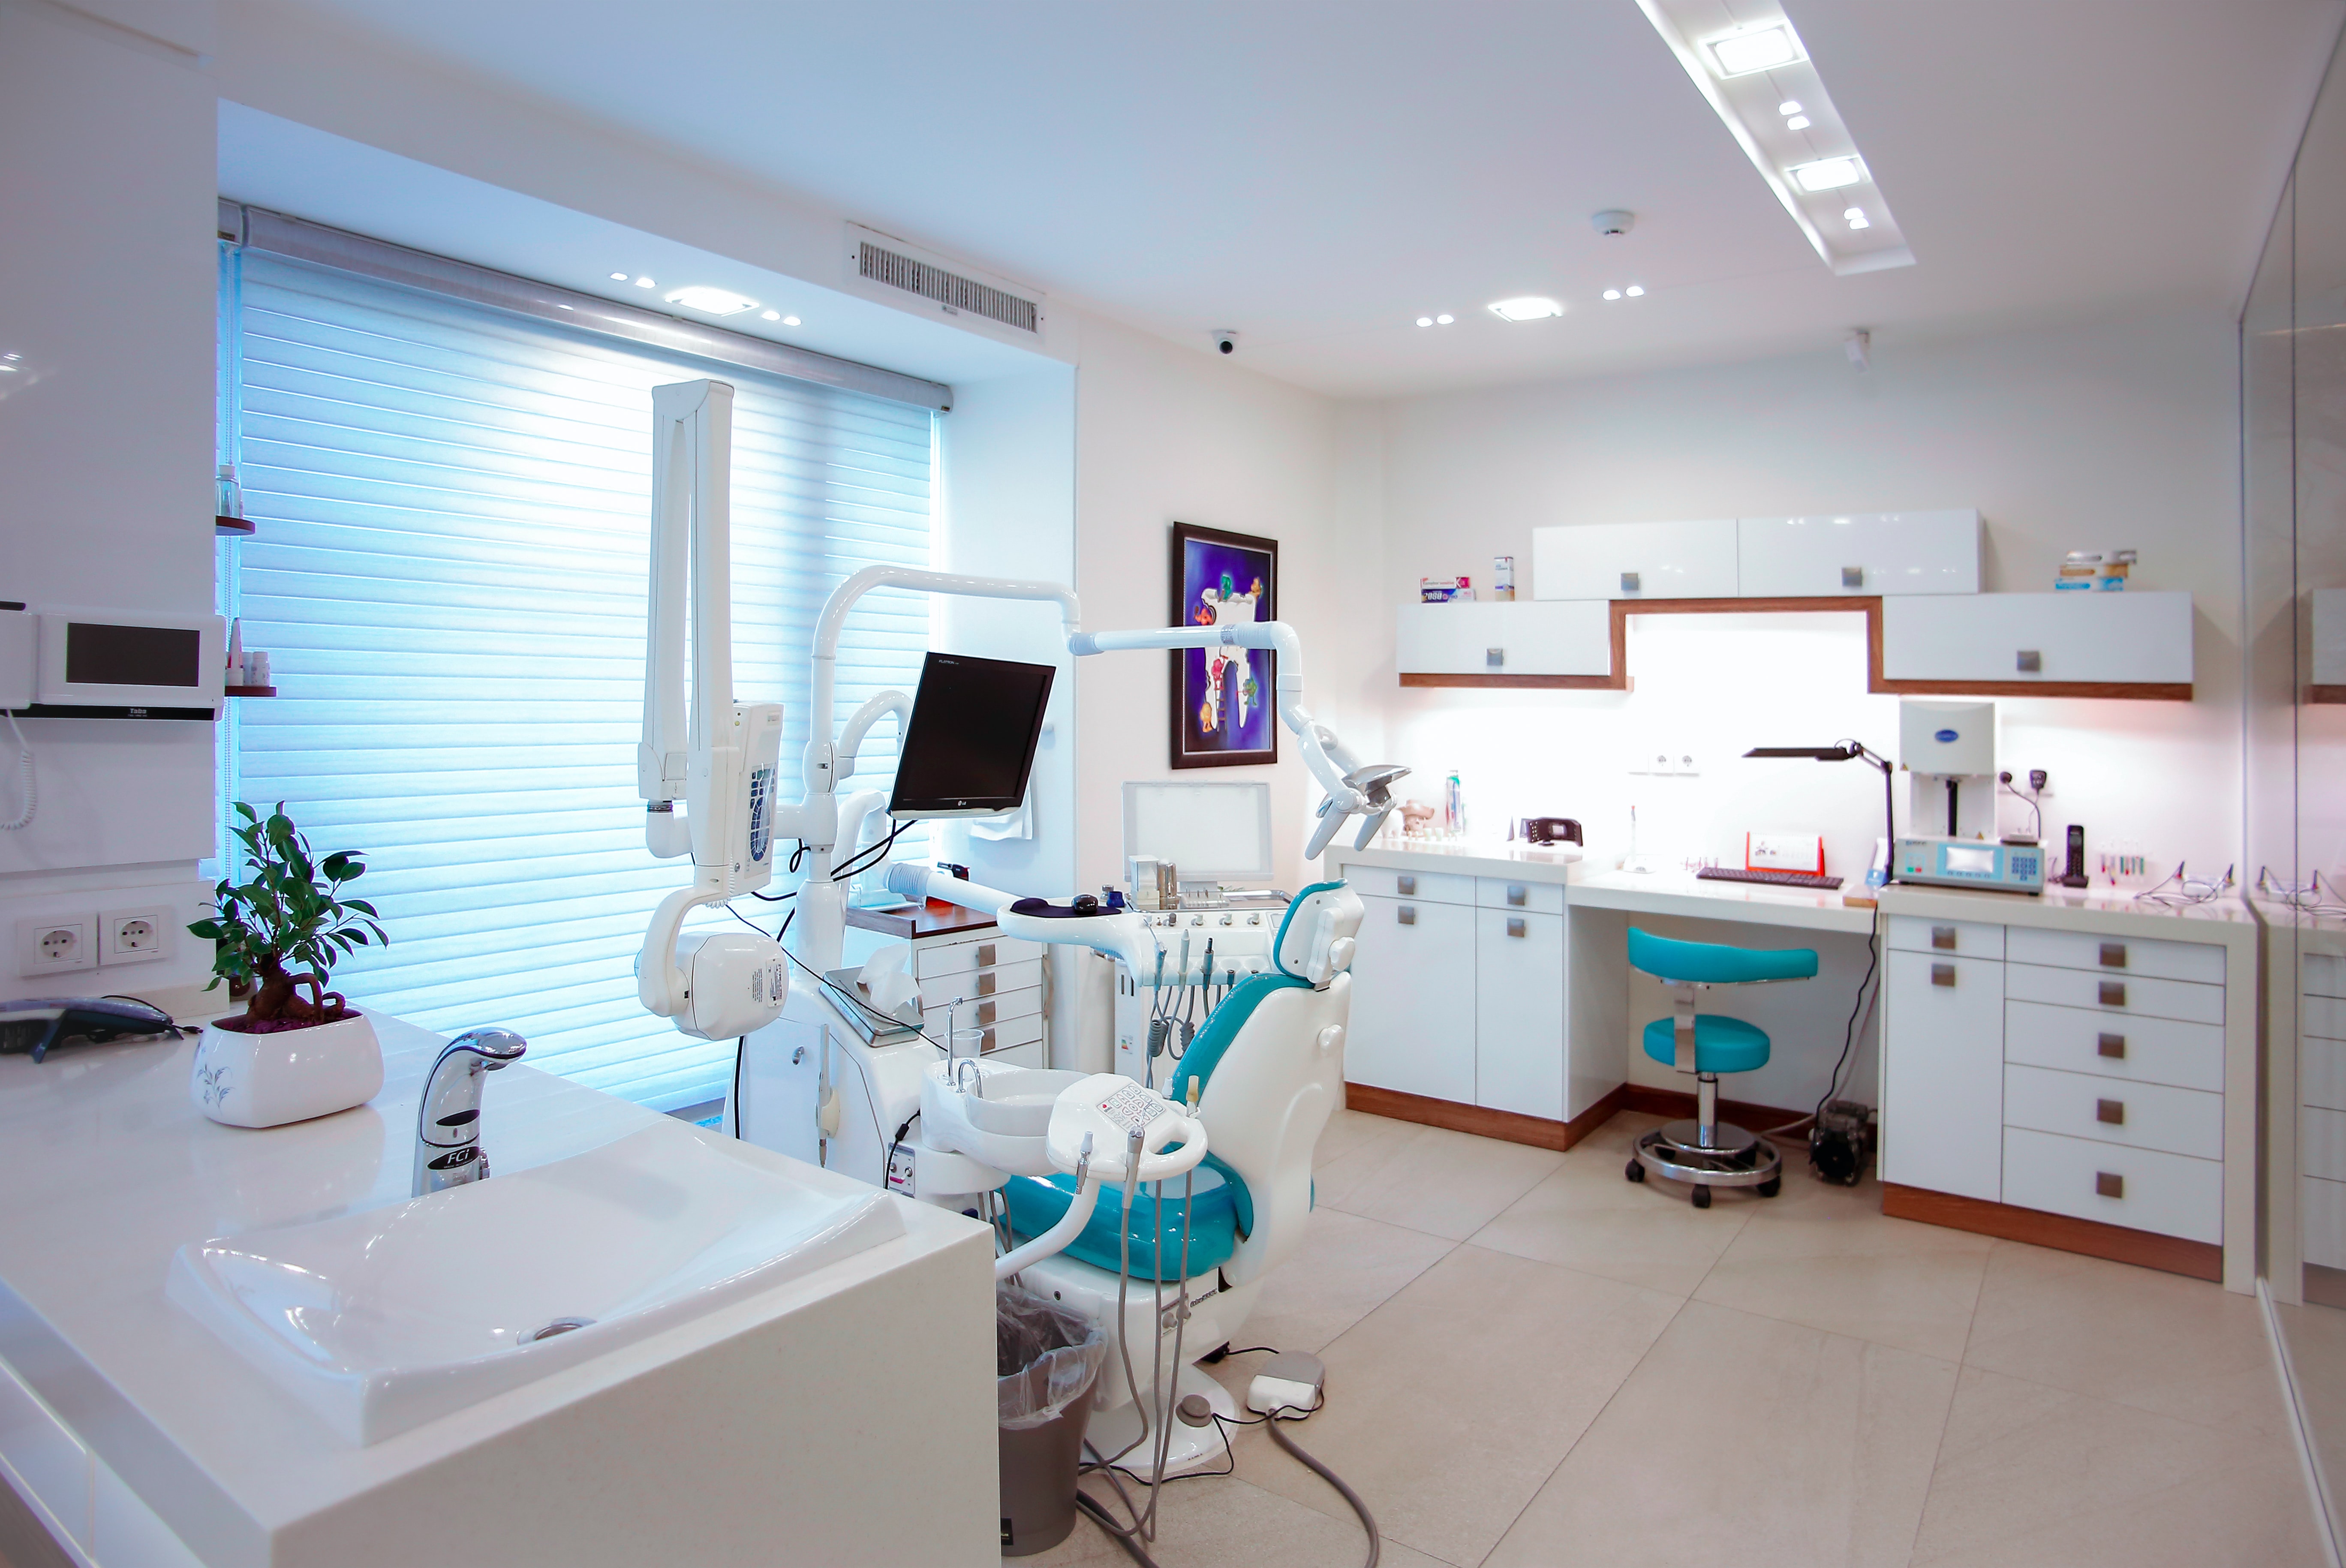 10 Important Factors to Consider when Buying a Dental Practice